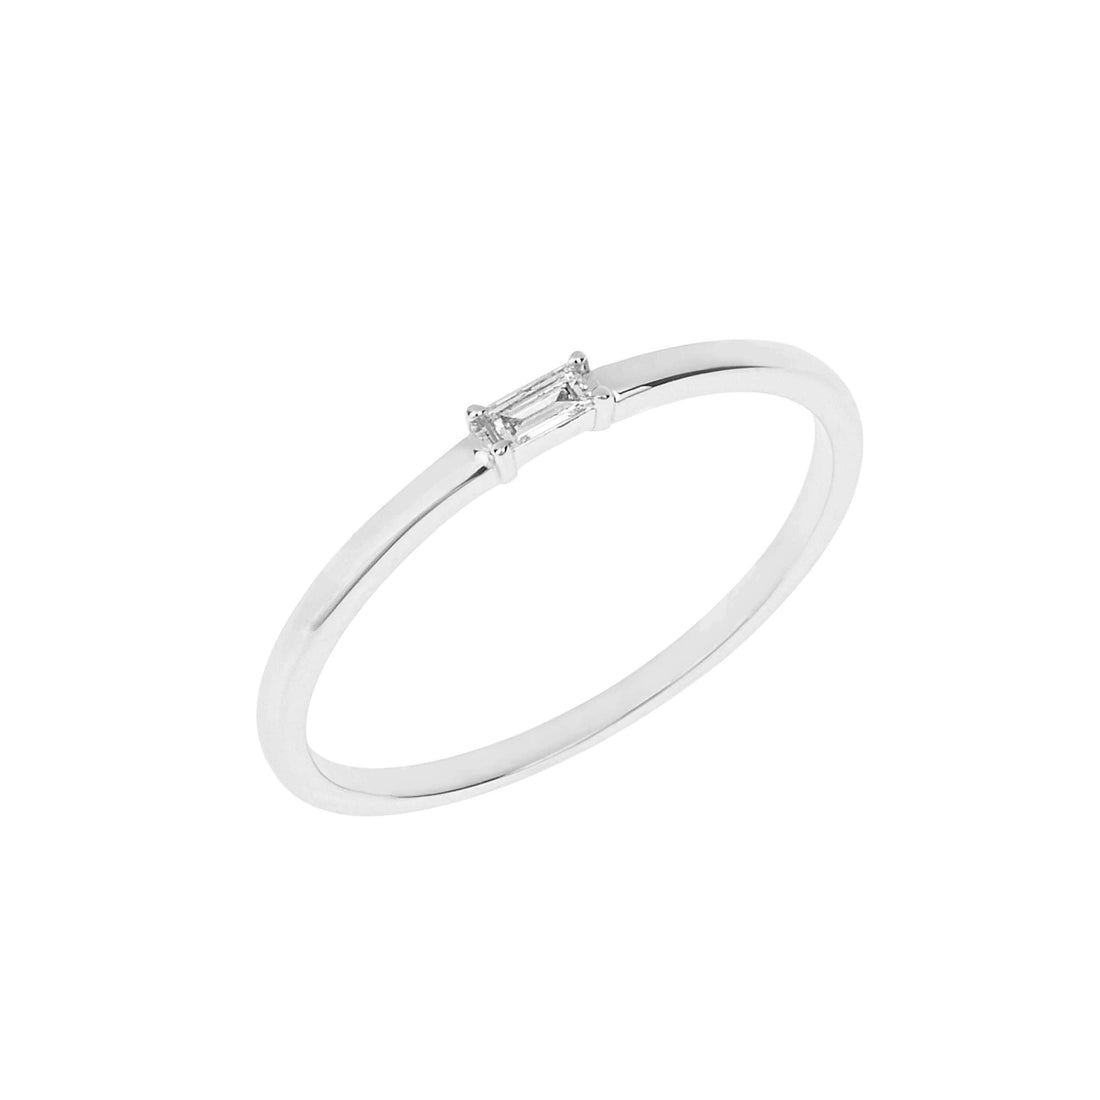 Solitaire Baguette Diamond Ring in 9ct White Gold - Robert Anthony Jewellers, Edinburgh